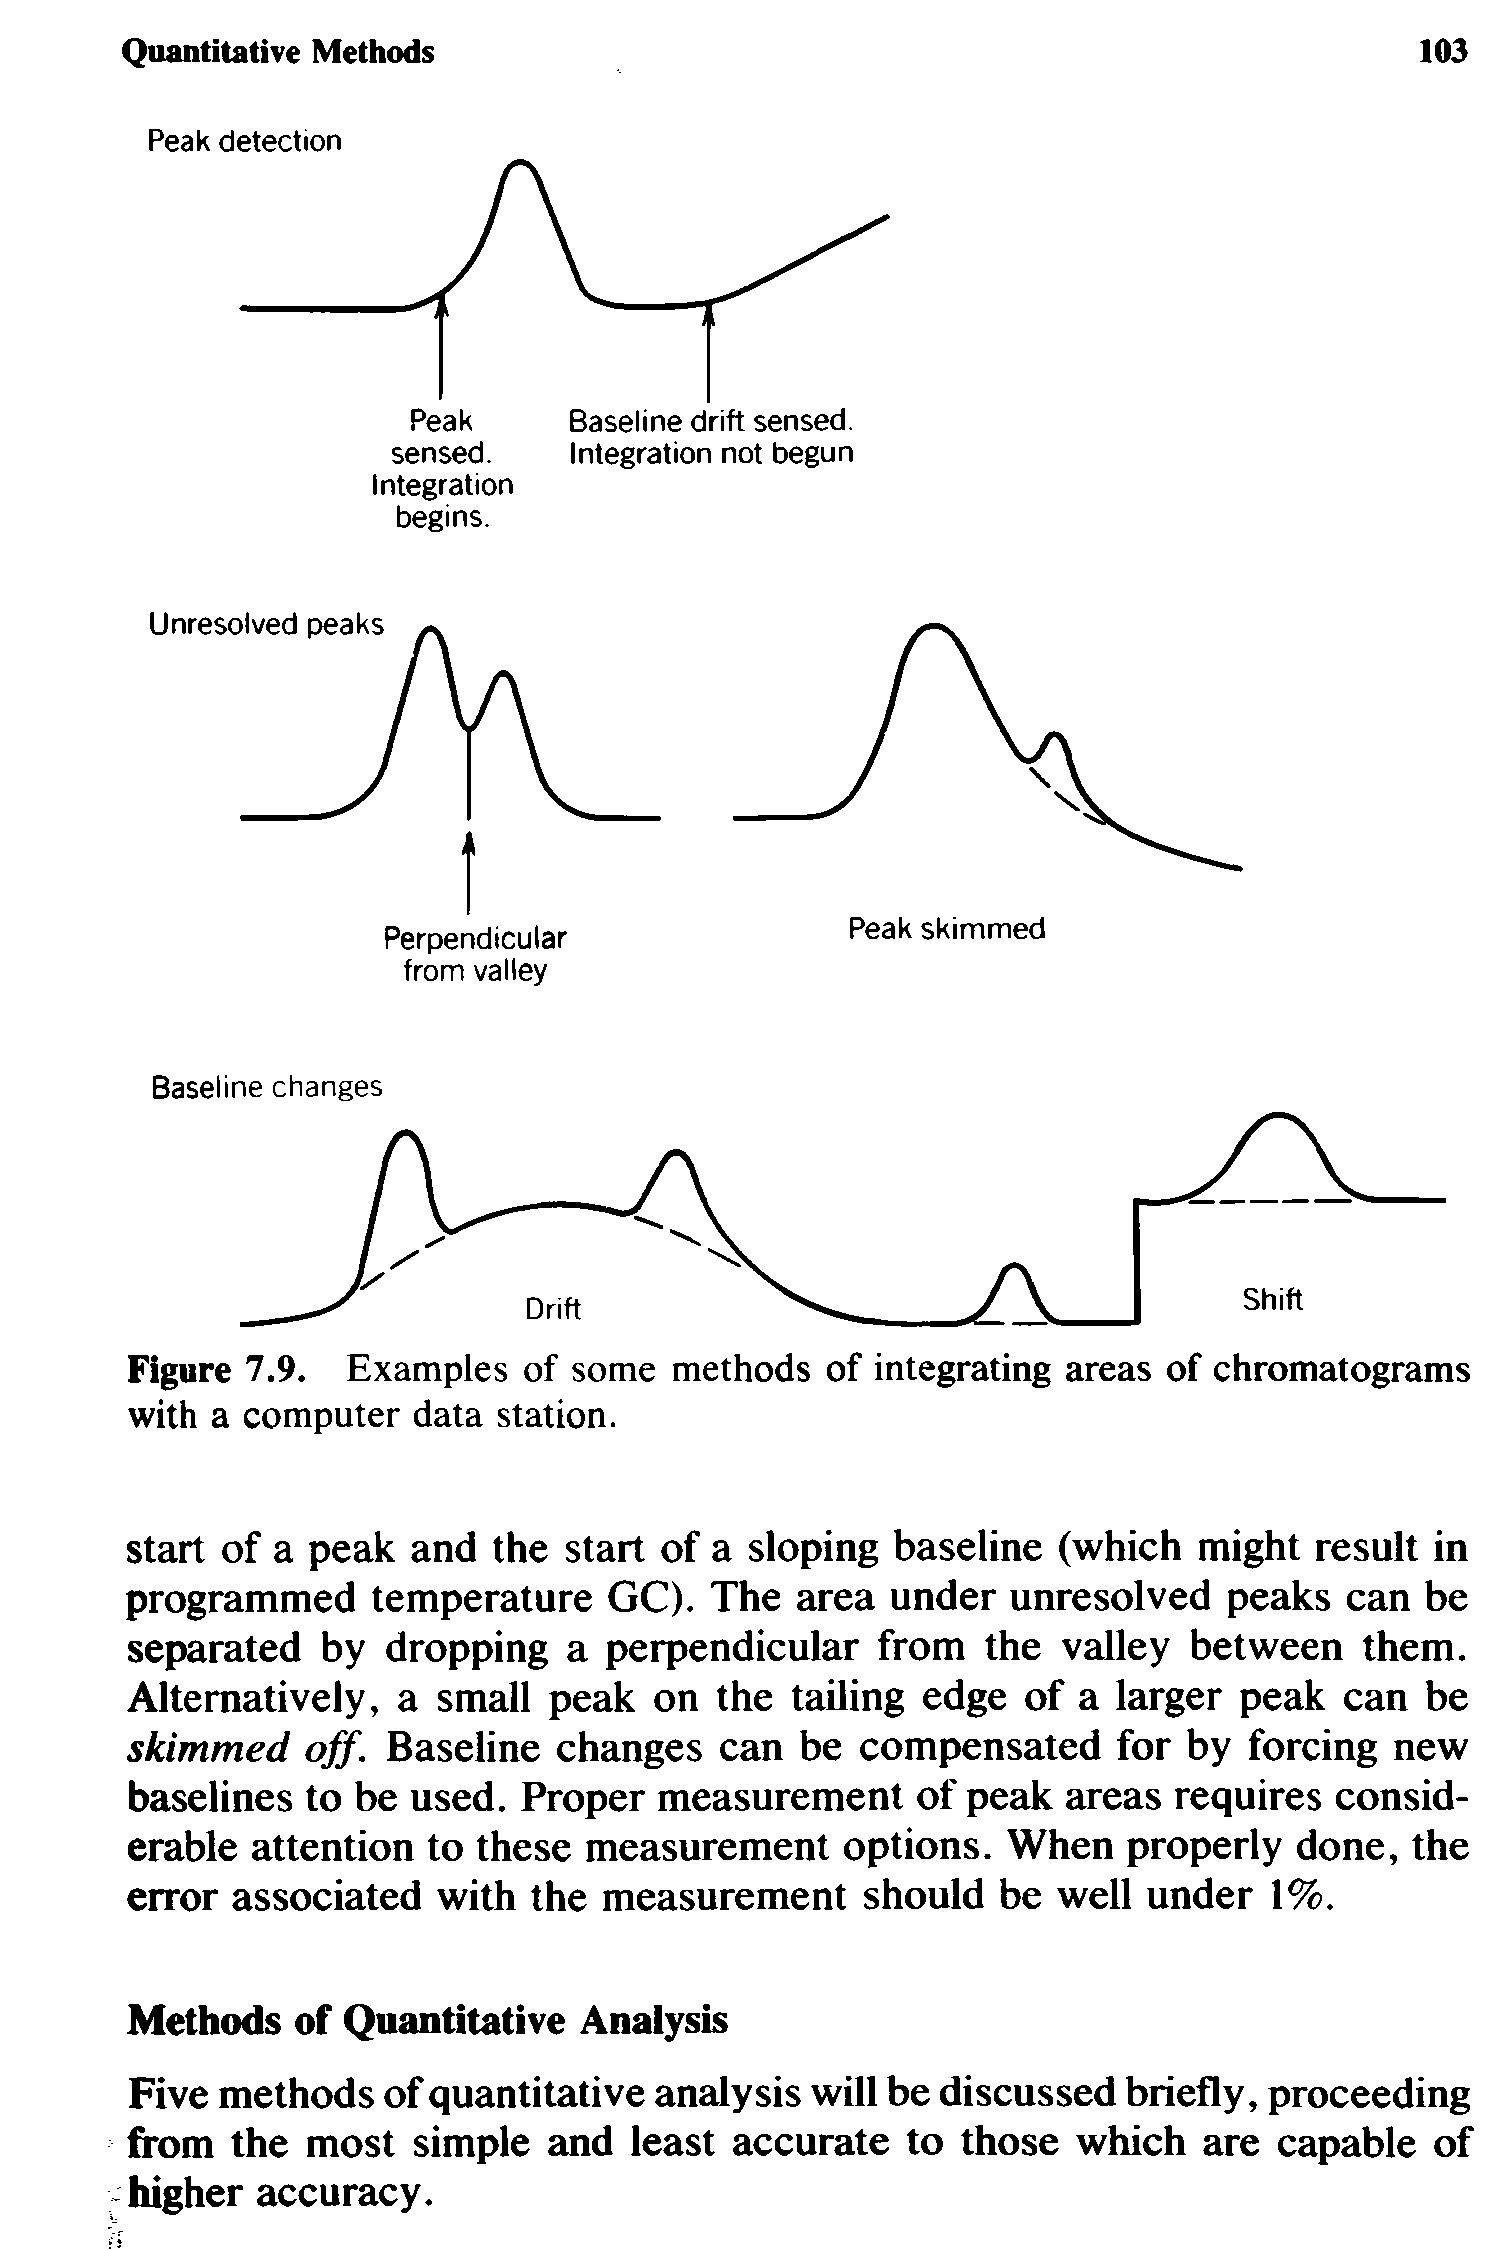 Figure 7.9. Examples of some methods of integrating areas of chromatograms with a computer data station.